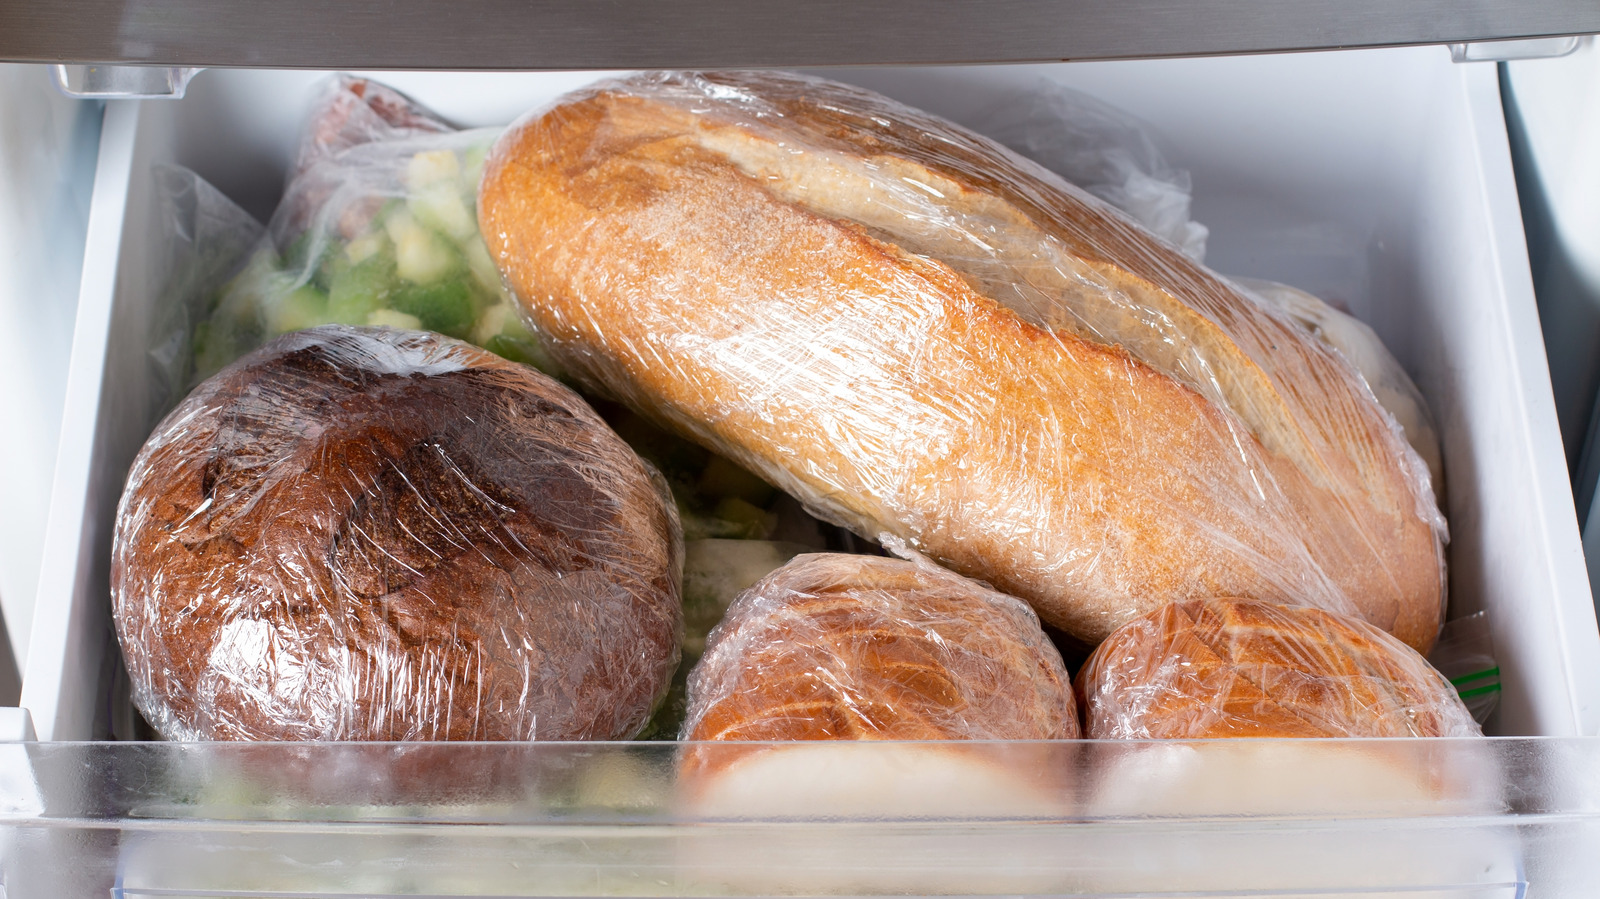 Why It's A Bad Idea To Refrigerate Bread